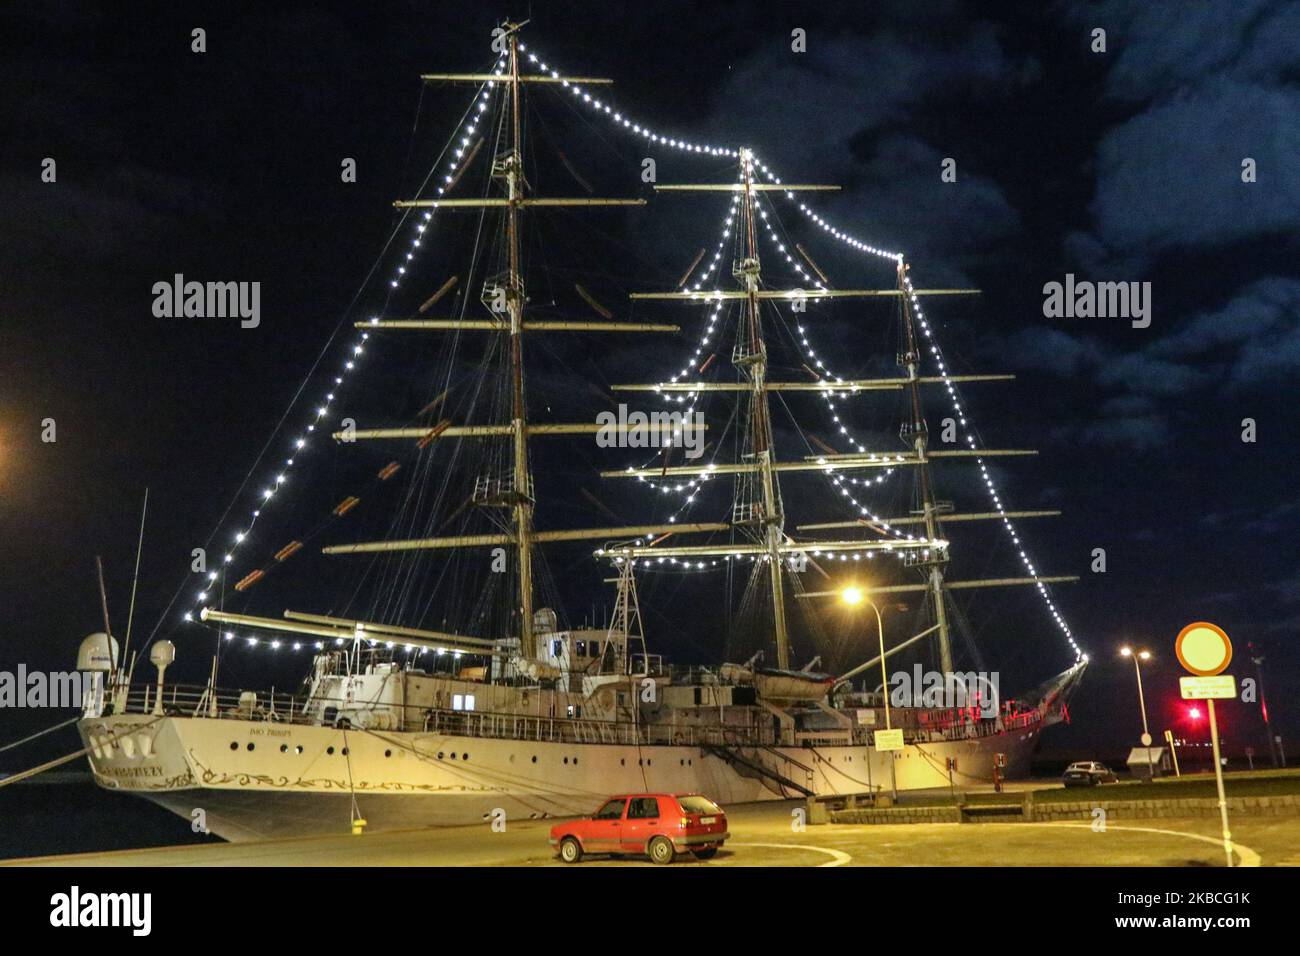 Christmas tree made of LED lights on board the SV Dar Mlodziezy sail ship is seen in Gdynia, Poland on 9 December 2019 (Photo by Michal Fludra/NurPhoto) Stock Photo